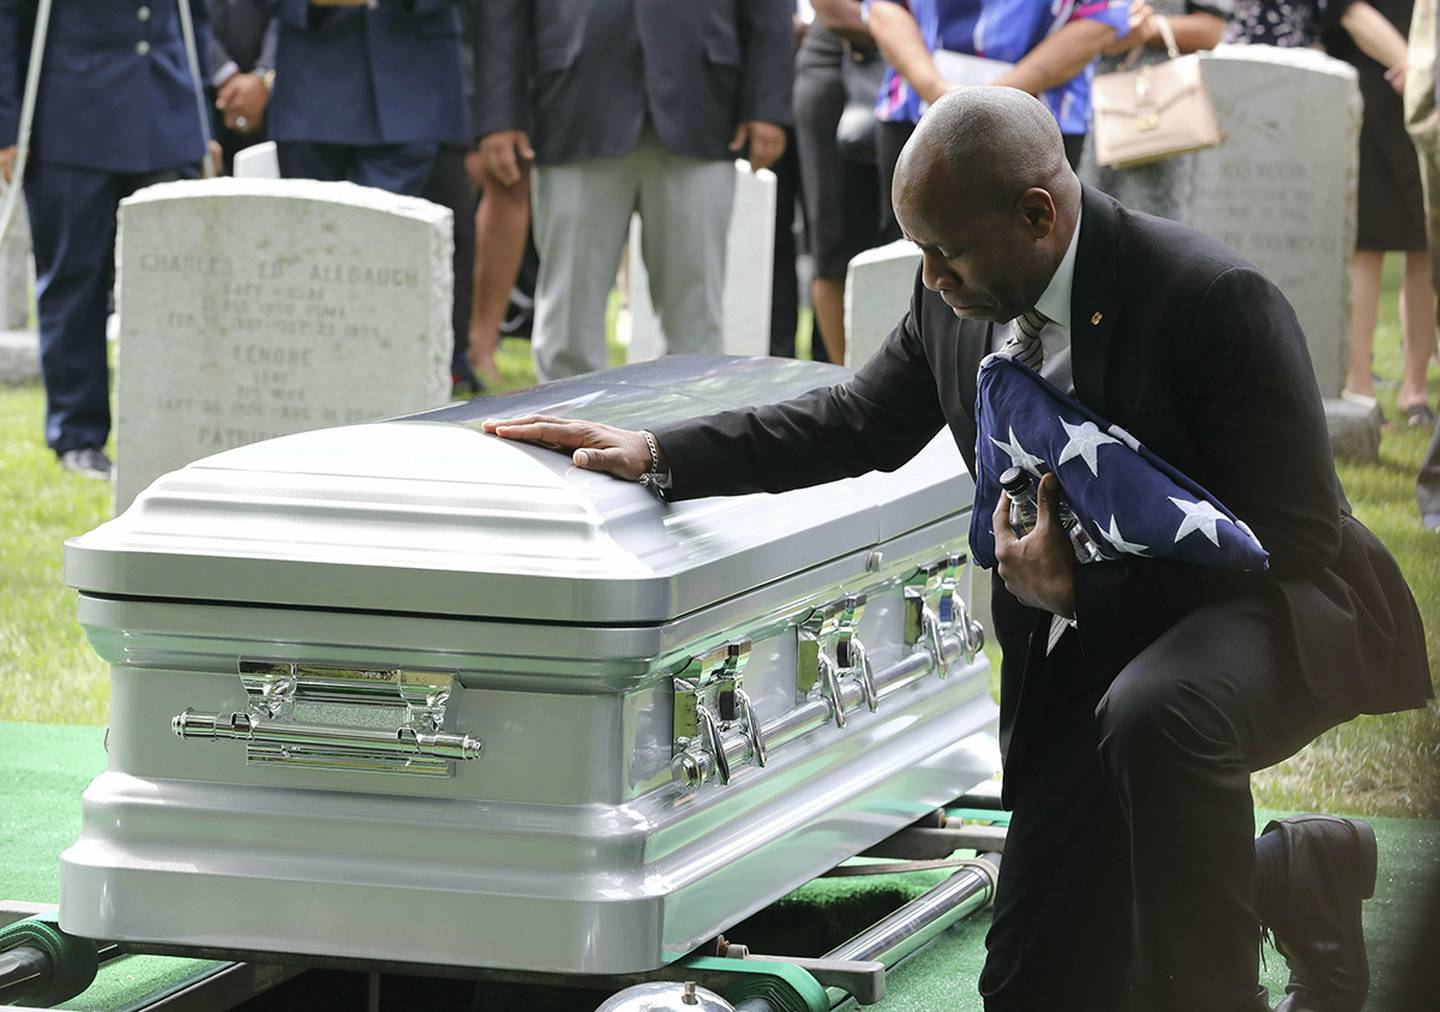 Christopher C. Morgan touches the casket of his son, West Point Cadet Christopher J. Morgan, during the interment ceremony at West Point, N.Y